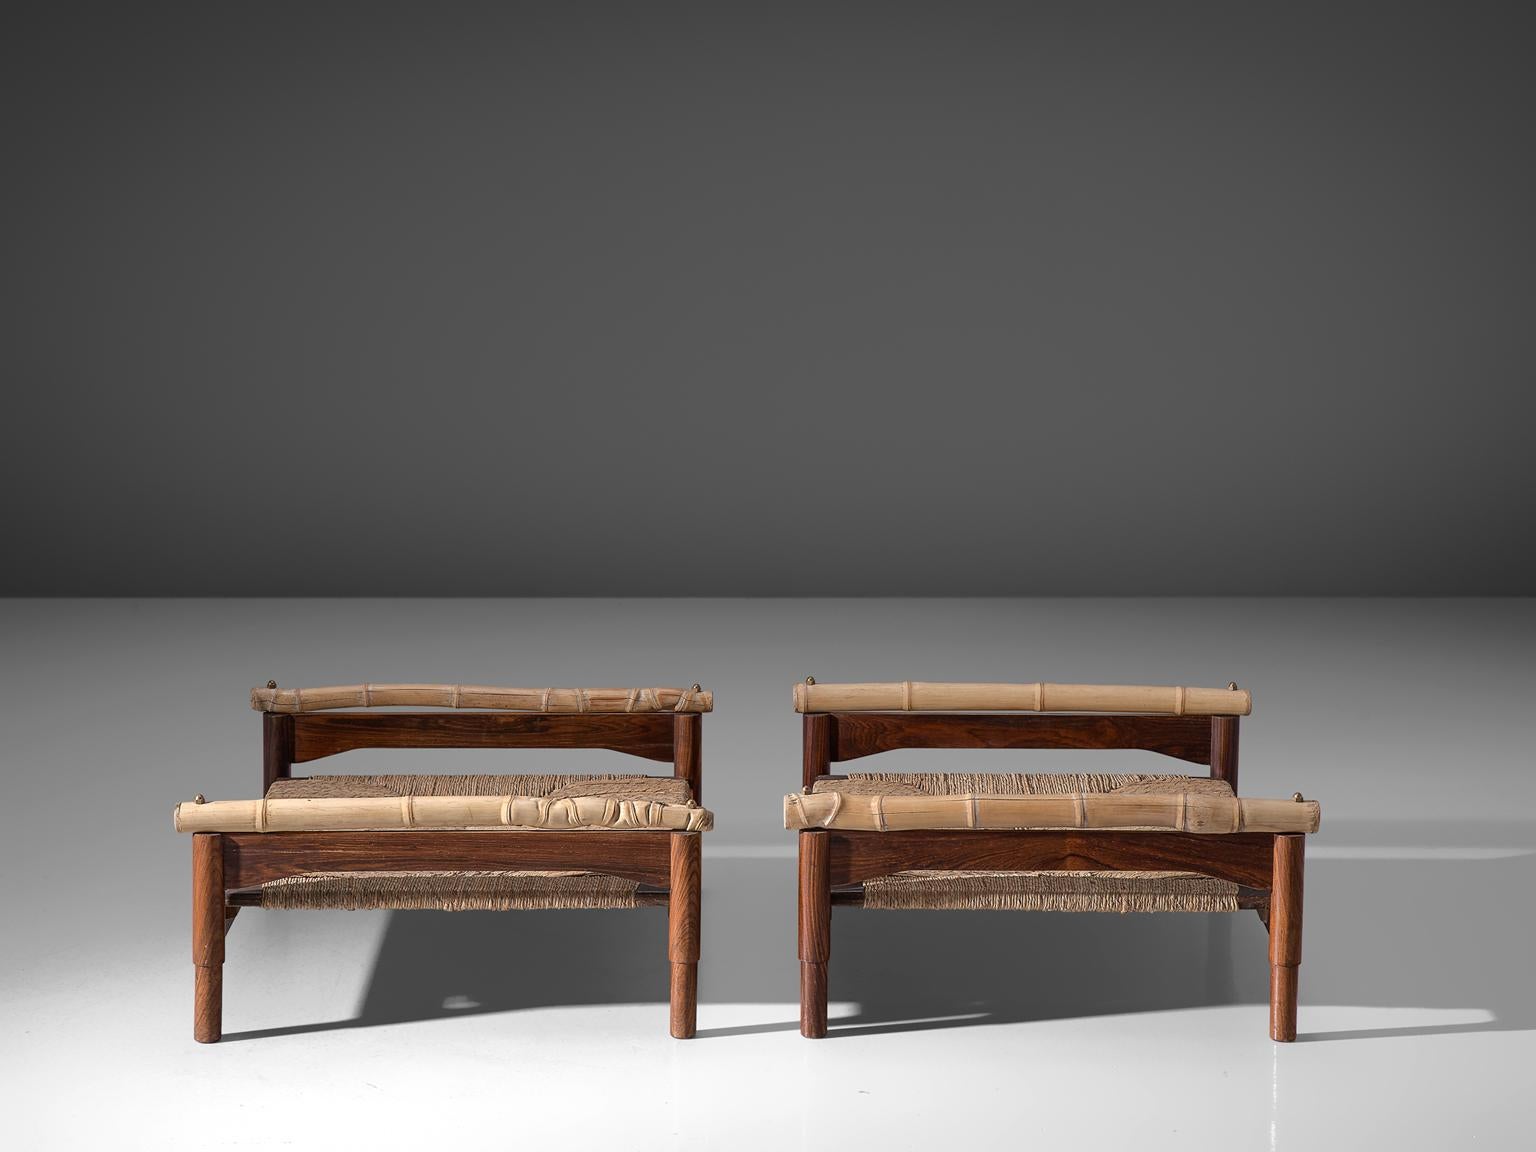 Benches or stools, rosewood, cane, bamboo, Italy, 1960s.

These midcentury stools are made of rosewood, cane and bamboo are very sculptural and robust. Their design is as such that it is very low to the ground. The materials are warm and natural